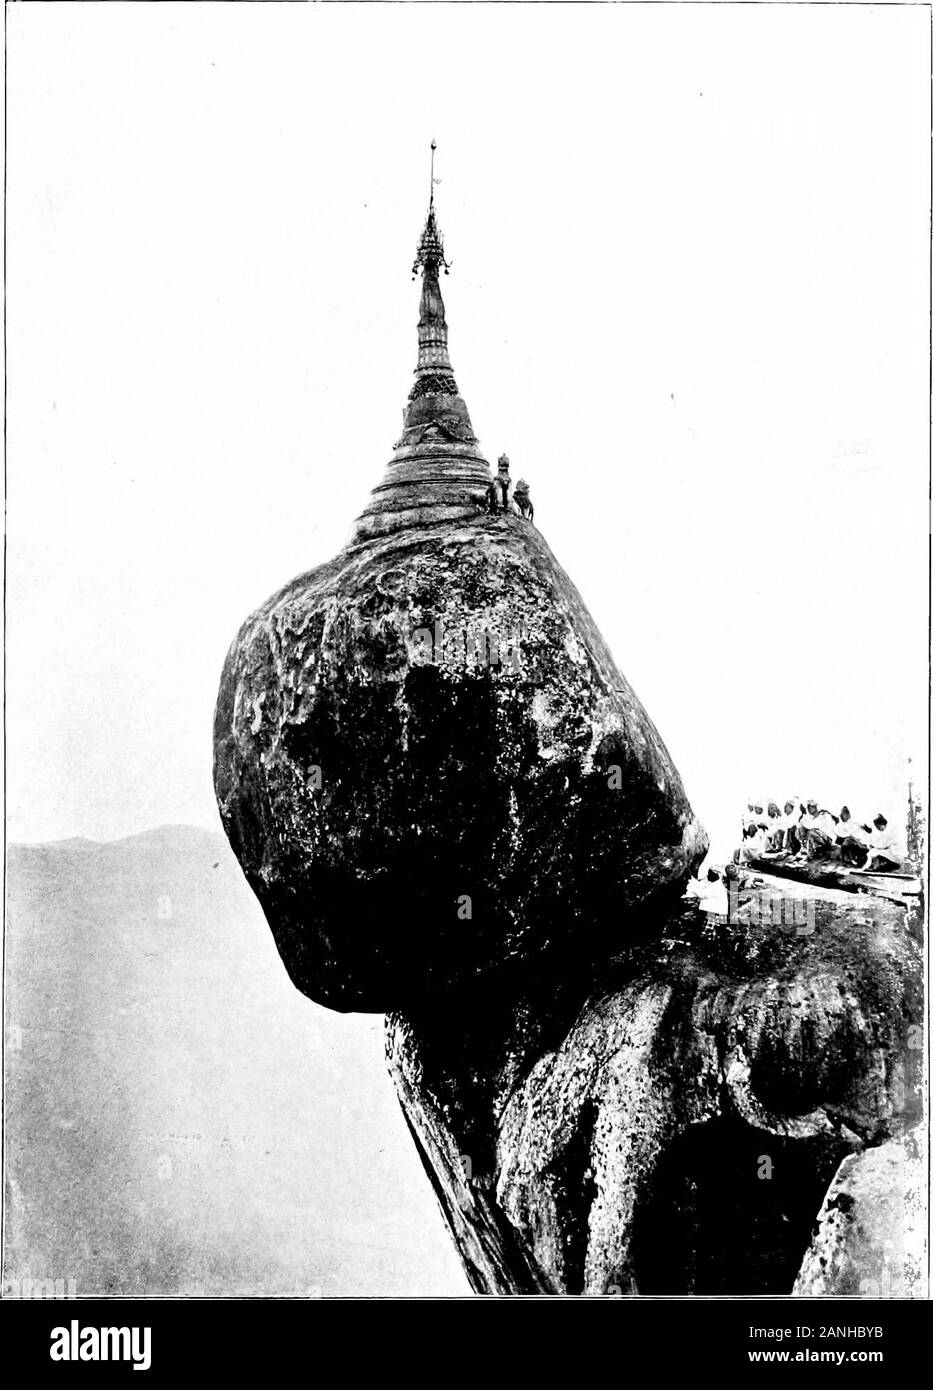 Burma . 428. SHWE-DAGON PAYA, RANGOON.. 429. KYAITTIYO PAYA. {To face p. 190. SHRINES AND PILGRIMAGES 191 a Karen from this neighbourhood was taken prisoner in the wars and carriedto Ava, where he eventually became yahdn. One night he dreamt that in thecavity of a rock, on a hill near his home, were two hairs of the Buddhawhich had been deposited by Ottara and Sawnase, the missionary yahdnwho brought Buddhism to Pegu ; they died and attained pari-nirvana at thisplace, and were buried at the foot of the hill. The Karen was allowed to travelto the spot, where he found what he had seen in his dre Stock Photo